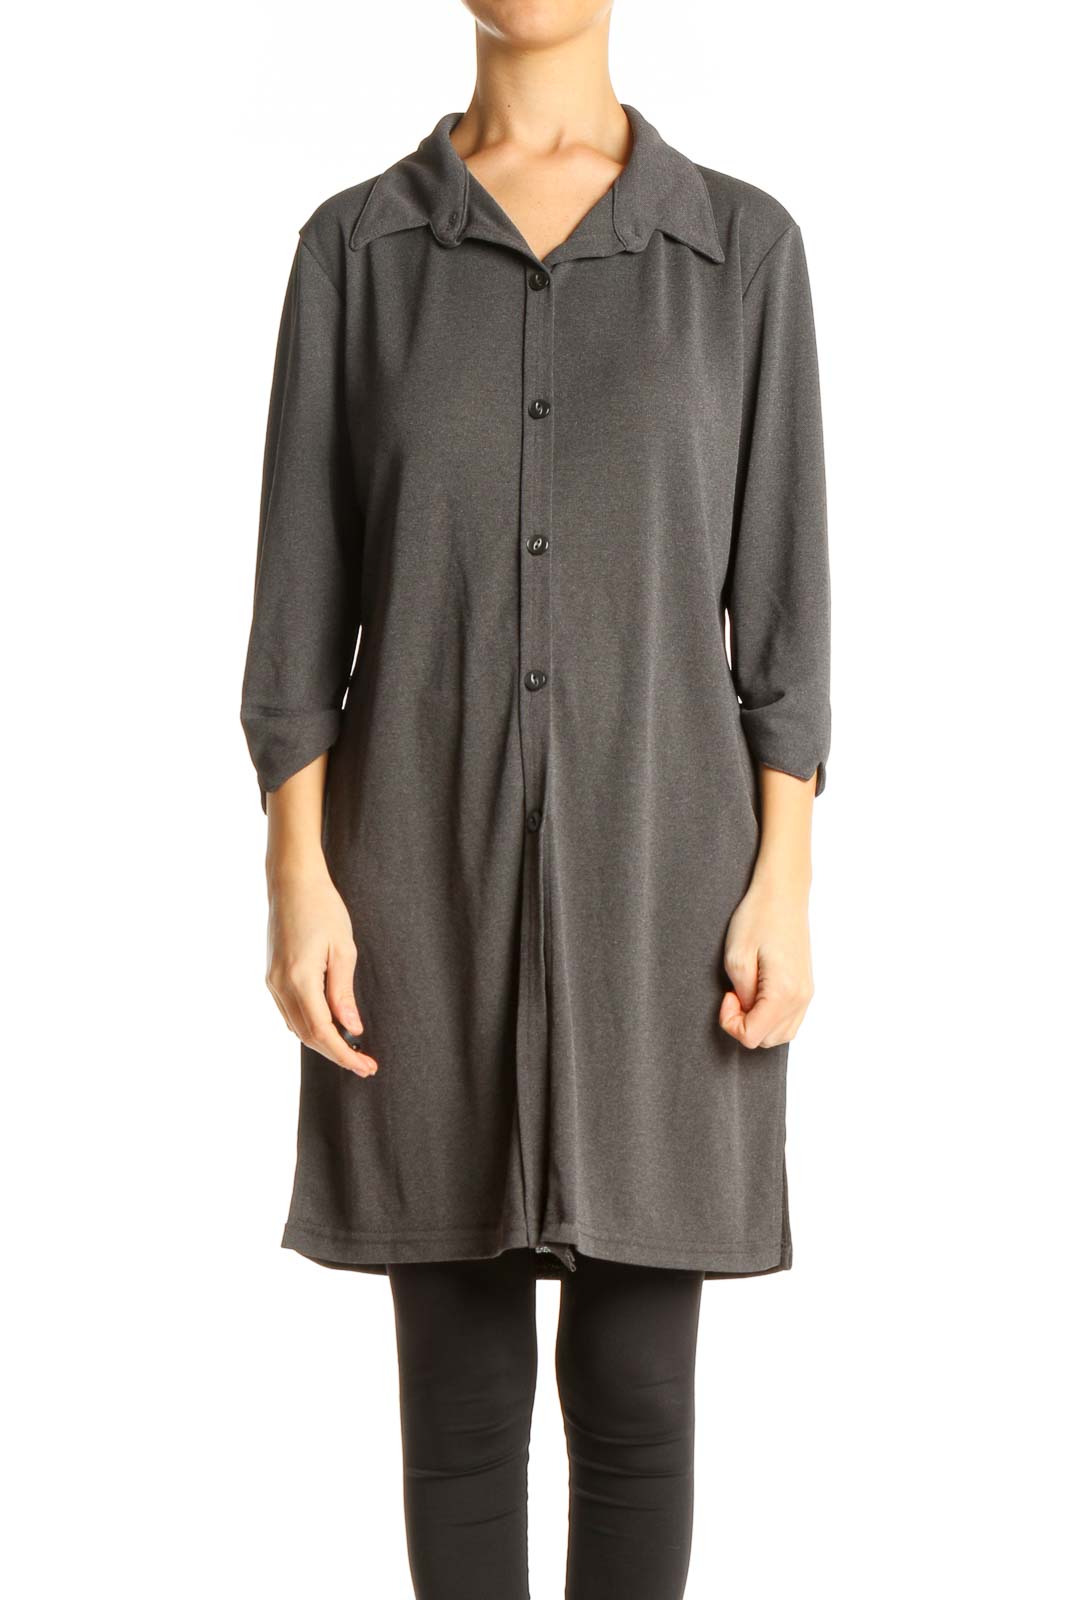 Gray Solid Work Shift Dress Front